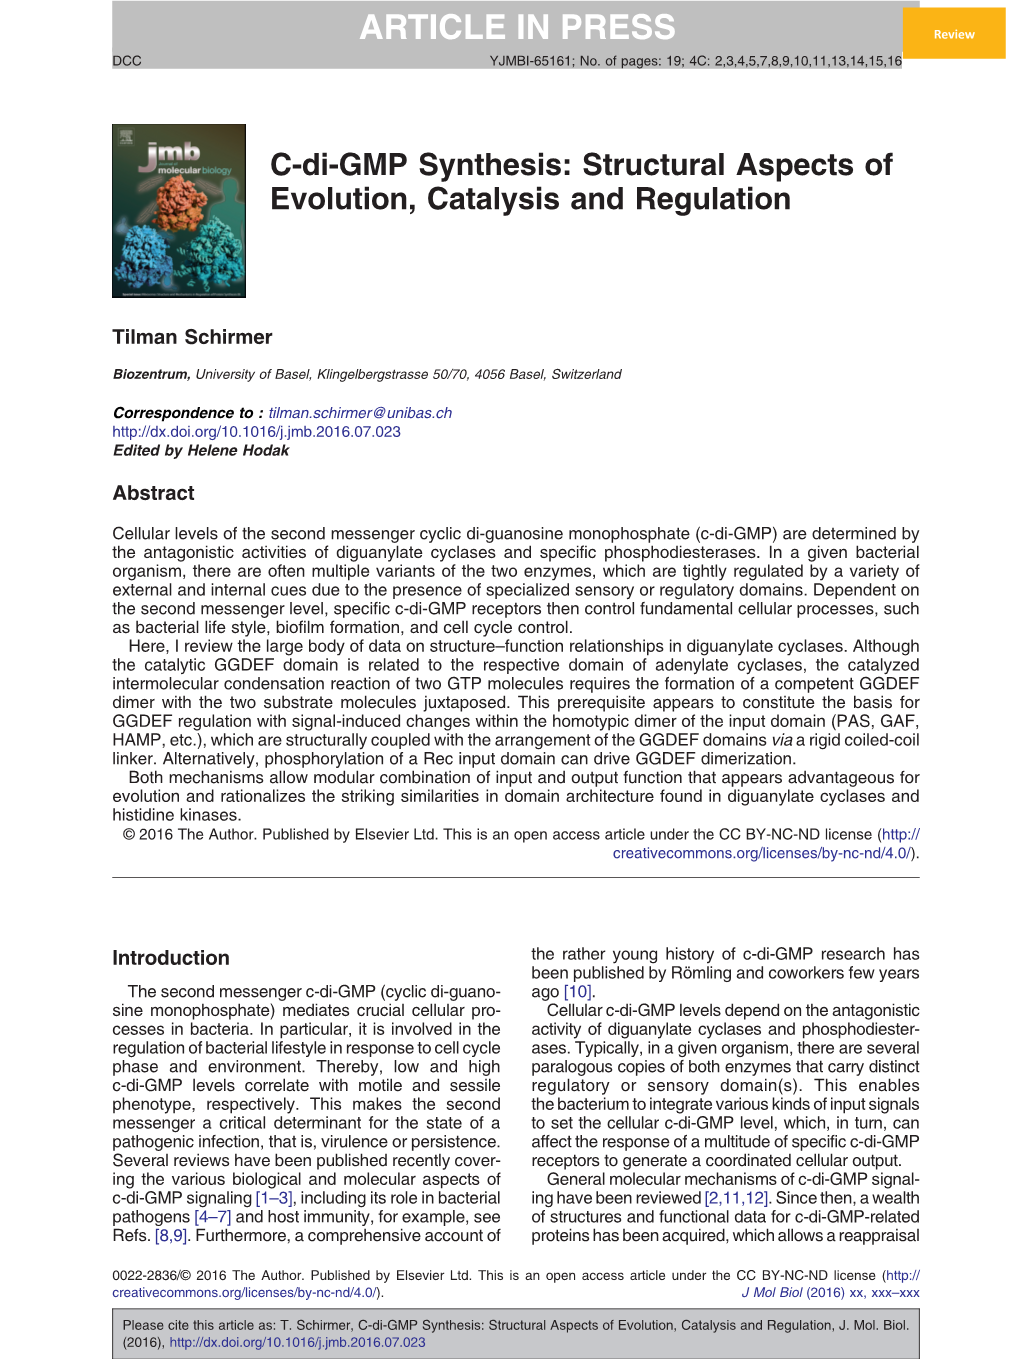 C-Di-GMP Synthesis: Structural Aspects of Evolution, Catalysis and Regulation